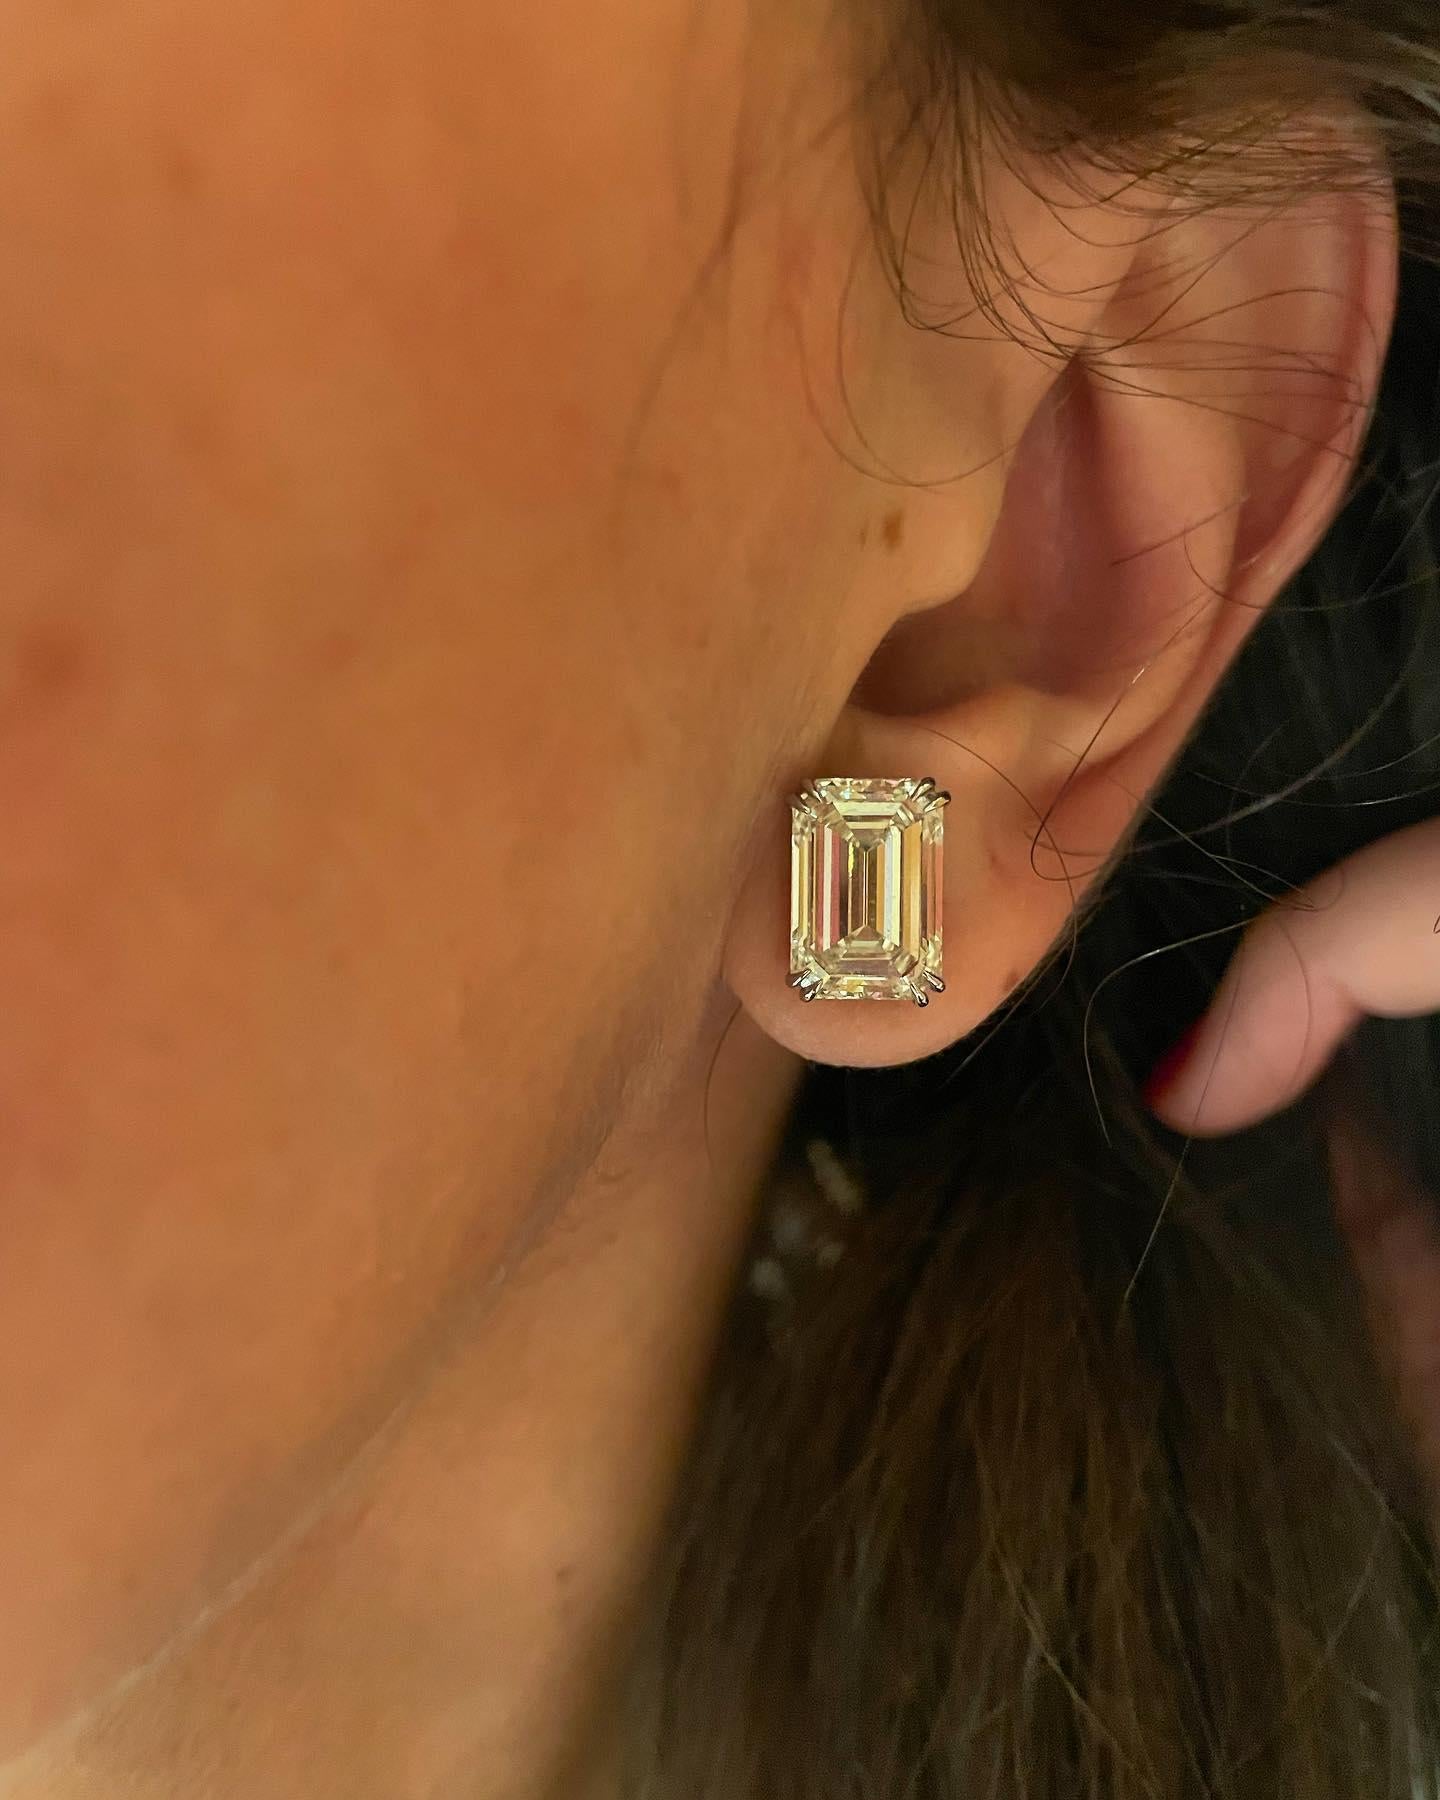 Elevate your elegance with these Exceptional GIA Certified 5 Carat Emerald Cut Diamond Stud Earrings, featuring two diamonds weighing 2.50 carats each. Meticulously certified by GIA for their extraordinary quality and brilliance, each earring boasts